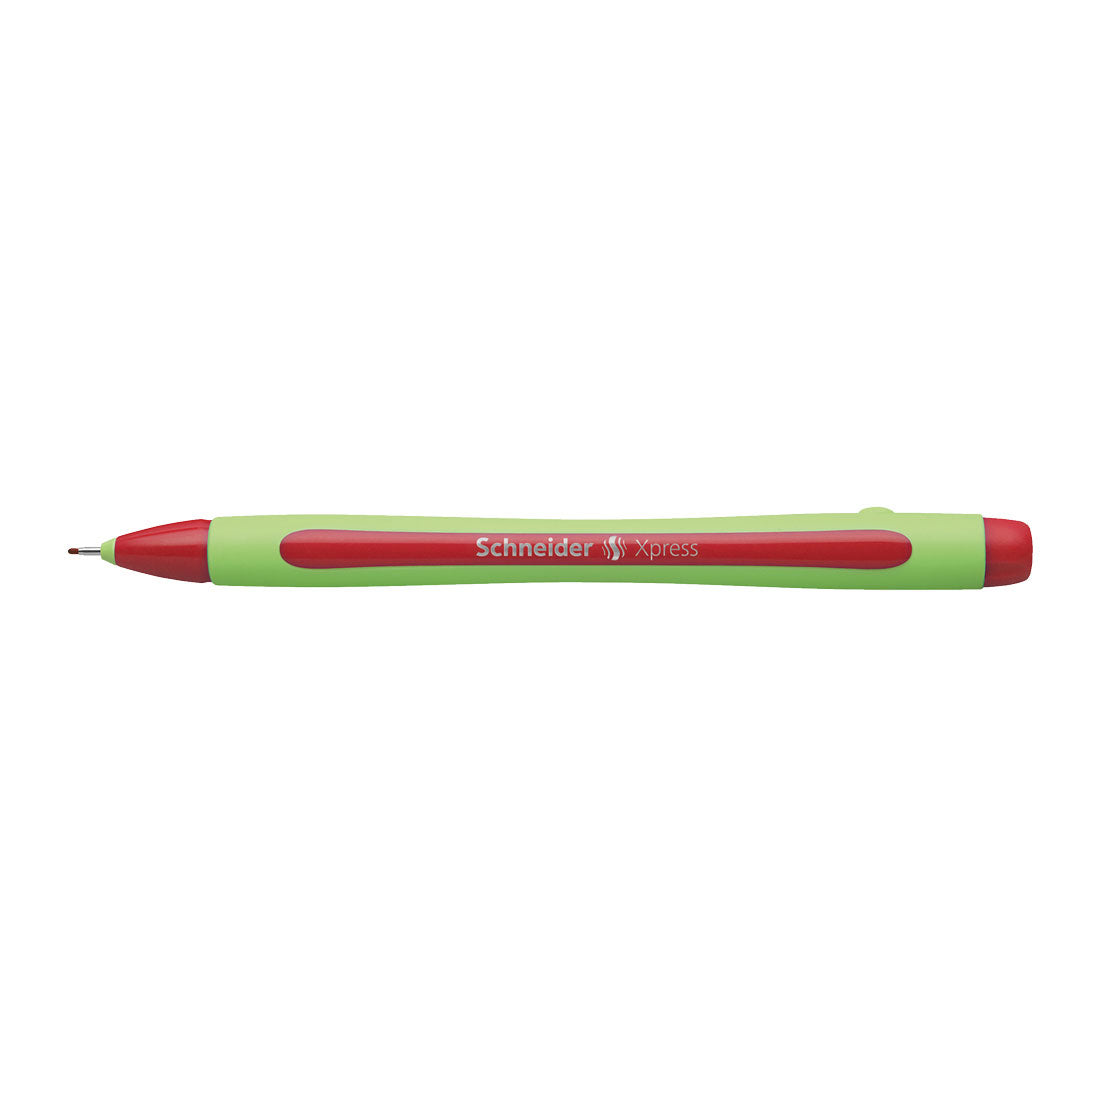 Xpress Fineliners 0.8mm, Box of 10#ink-color_red